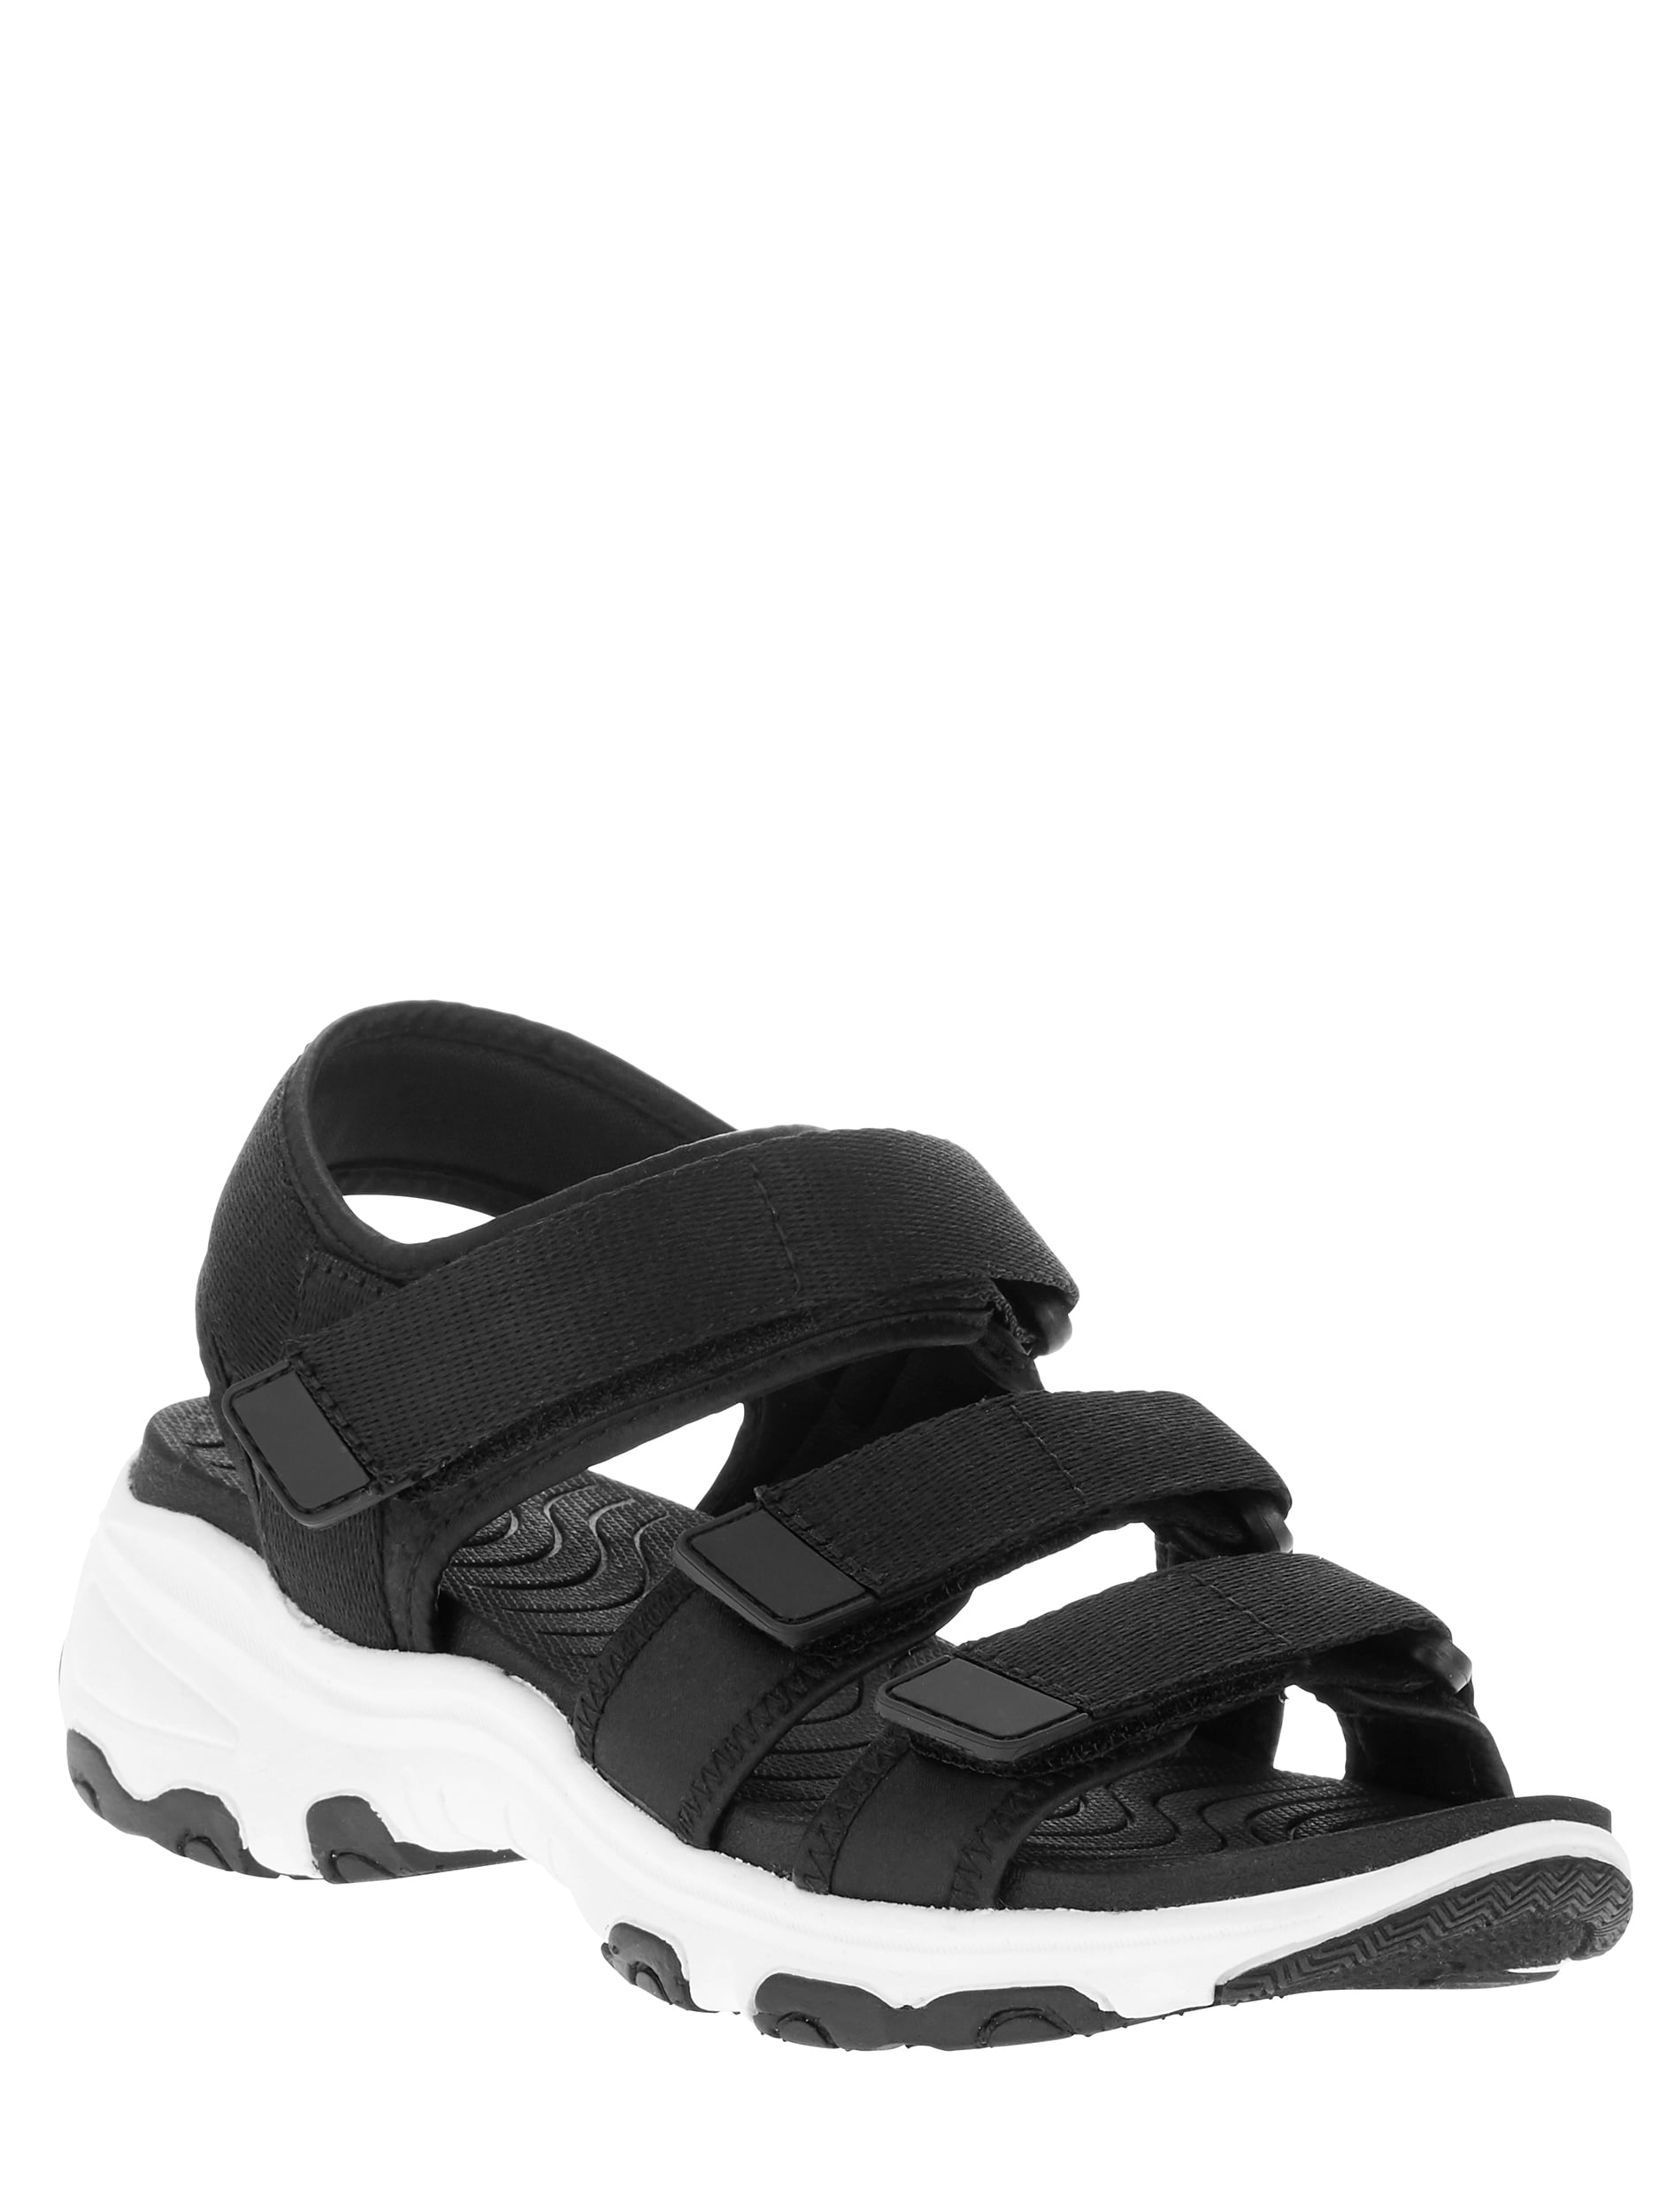 athletic works women's low bungee shoe